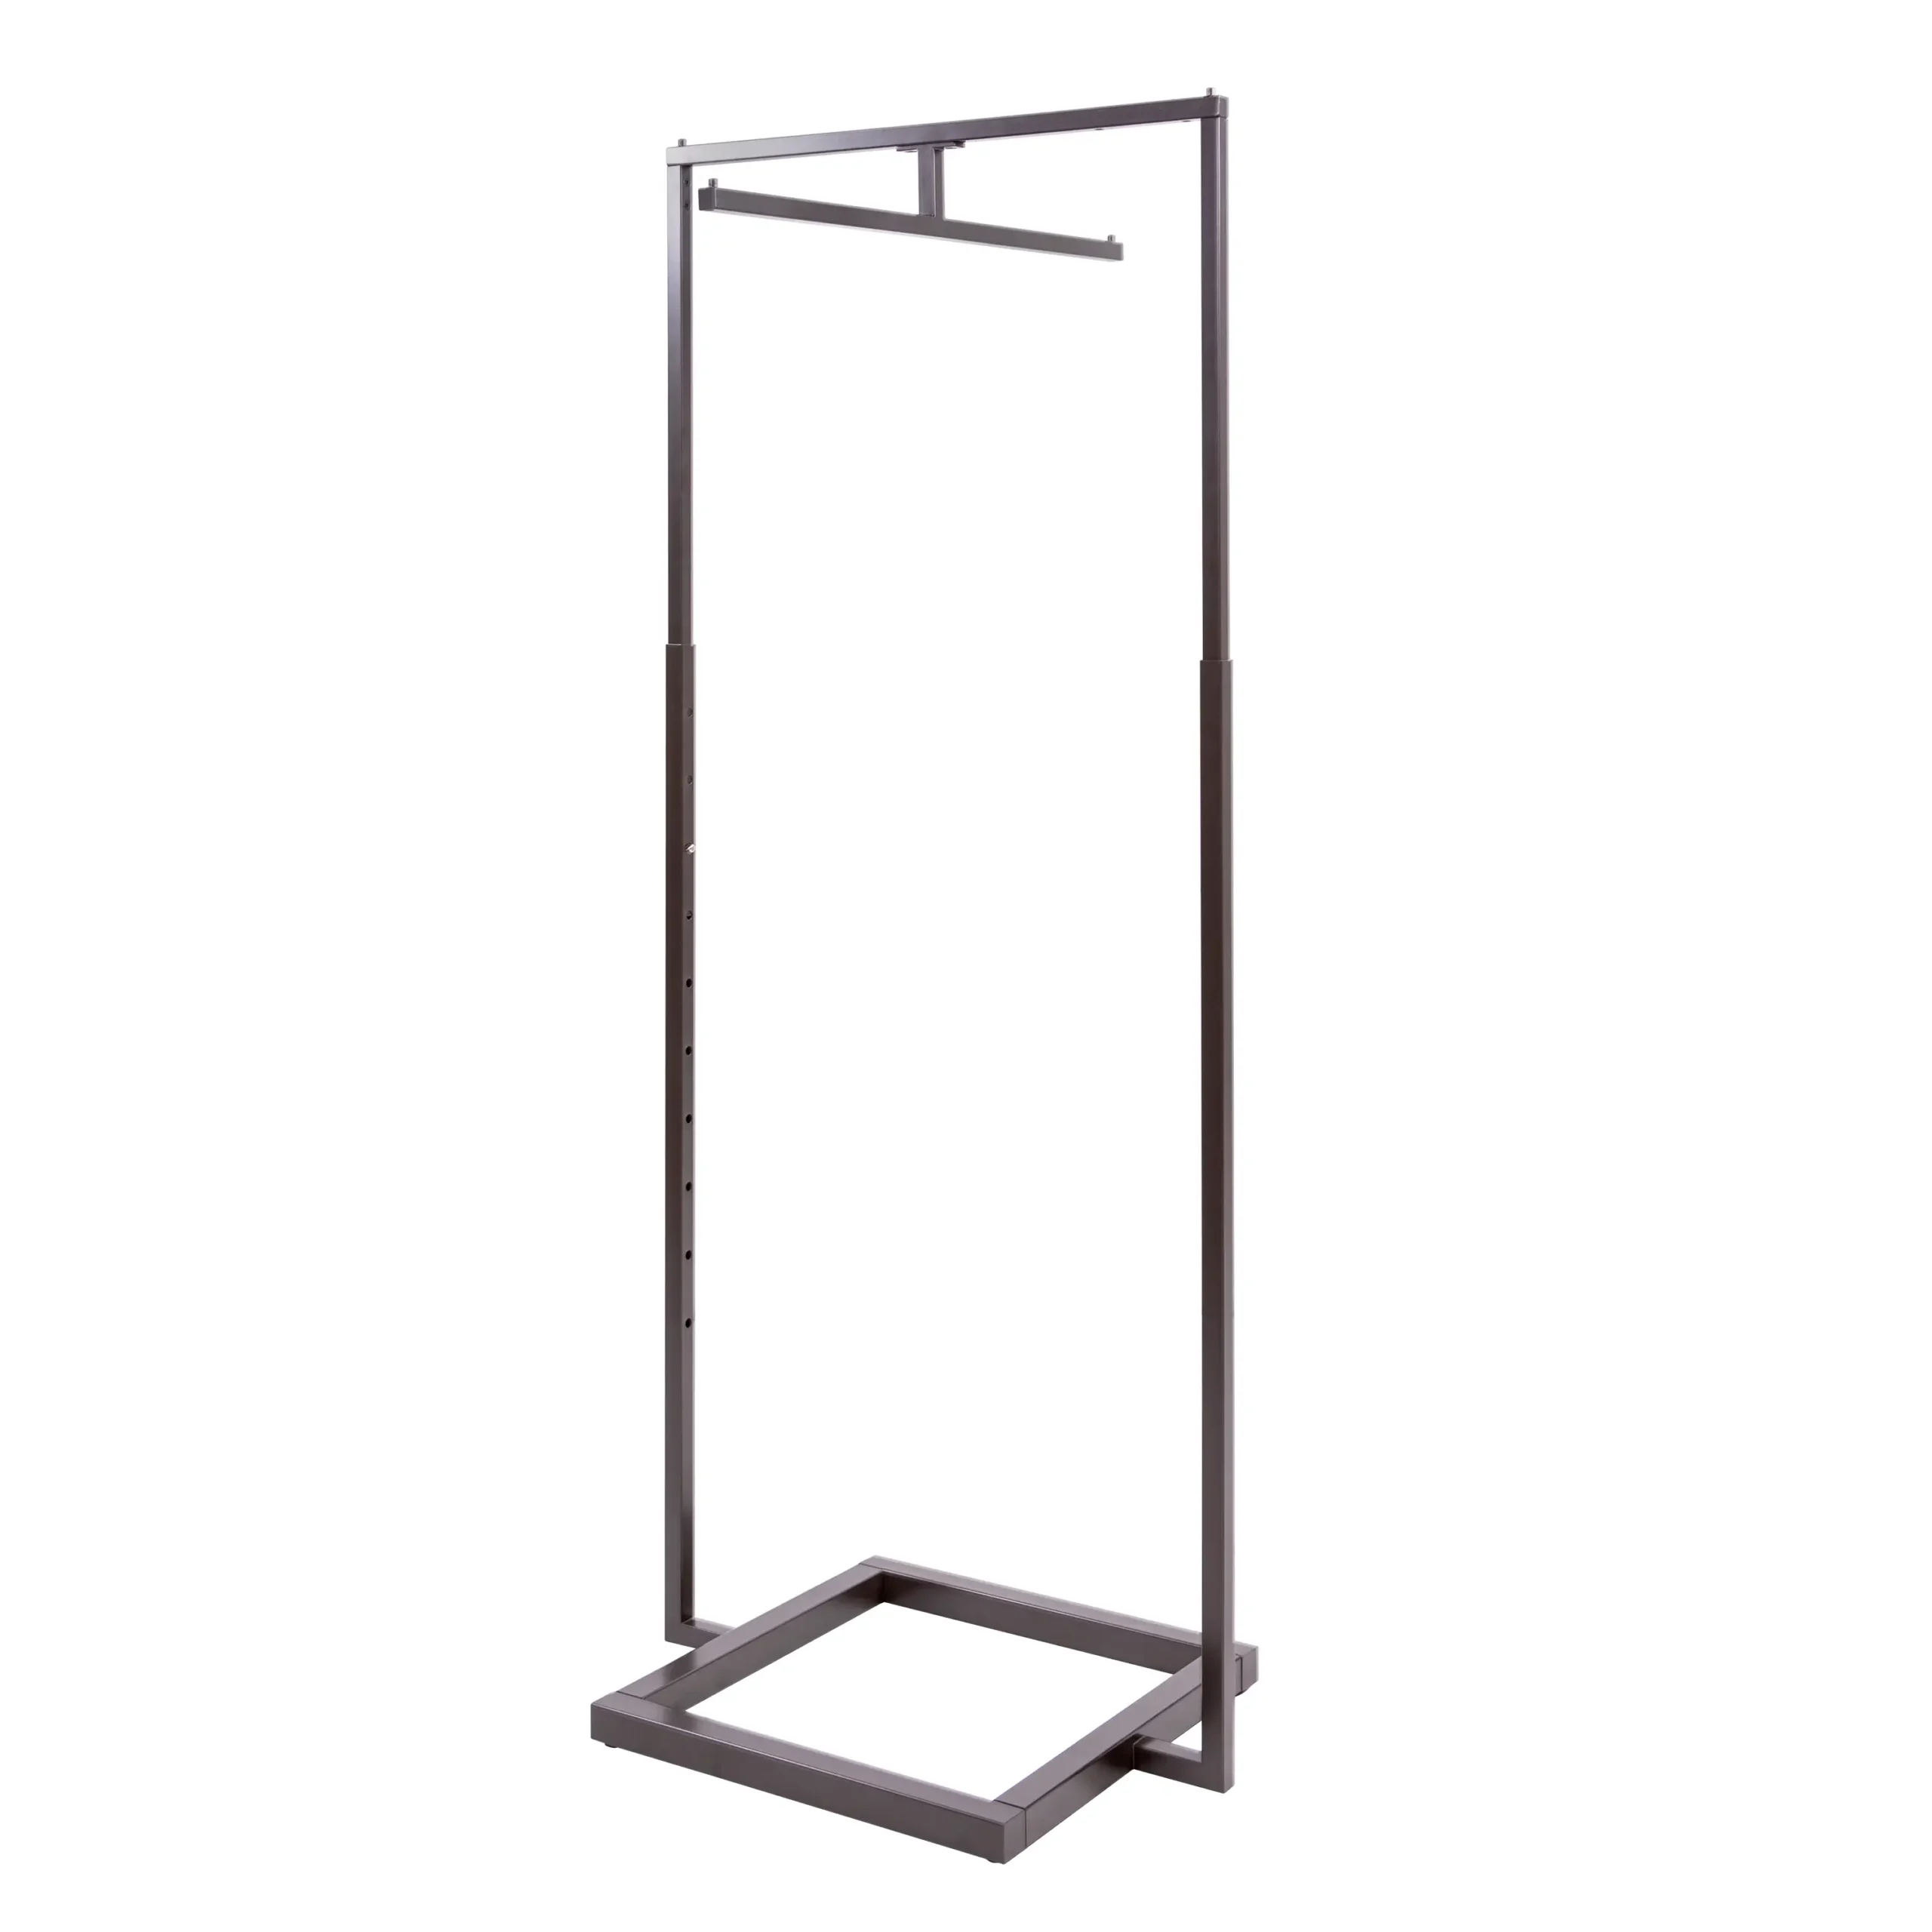 Sofia Extended 2-Way Rack with Straight Bar with Adjustable Height